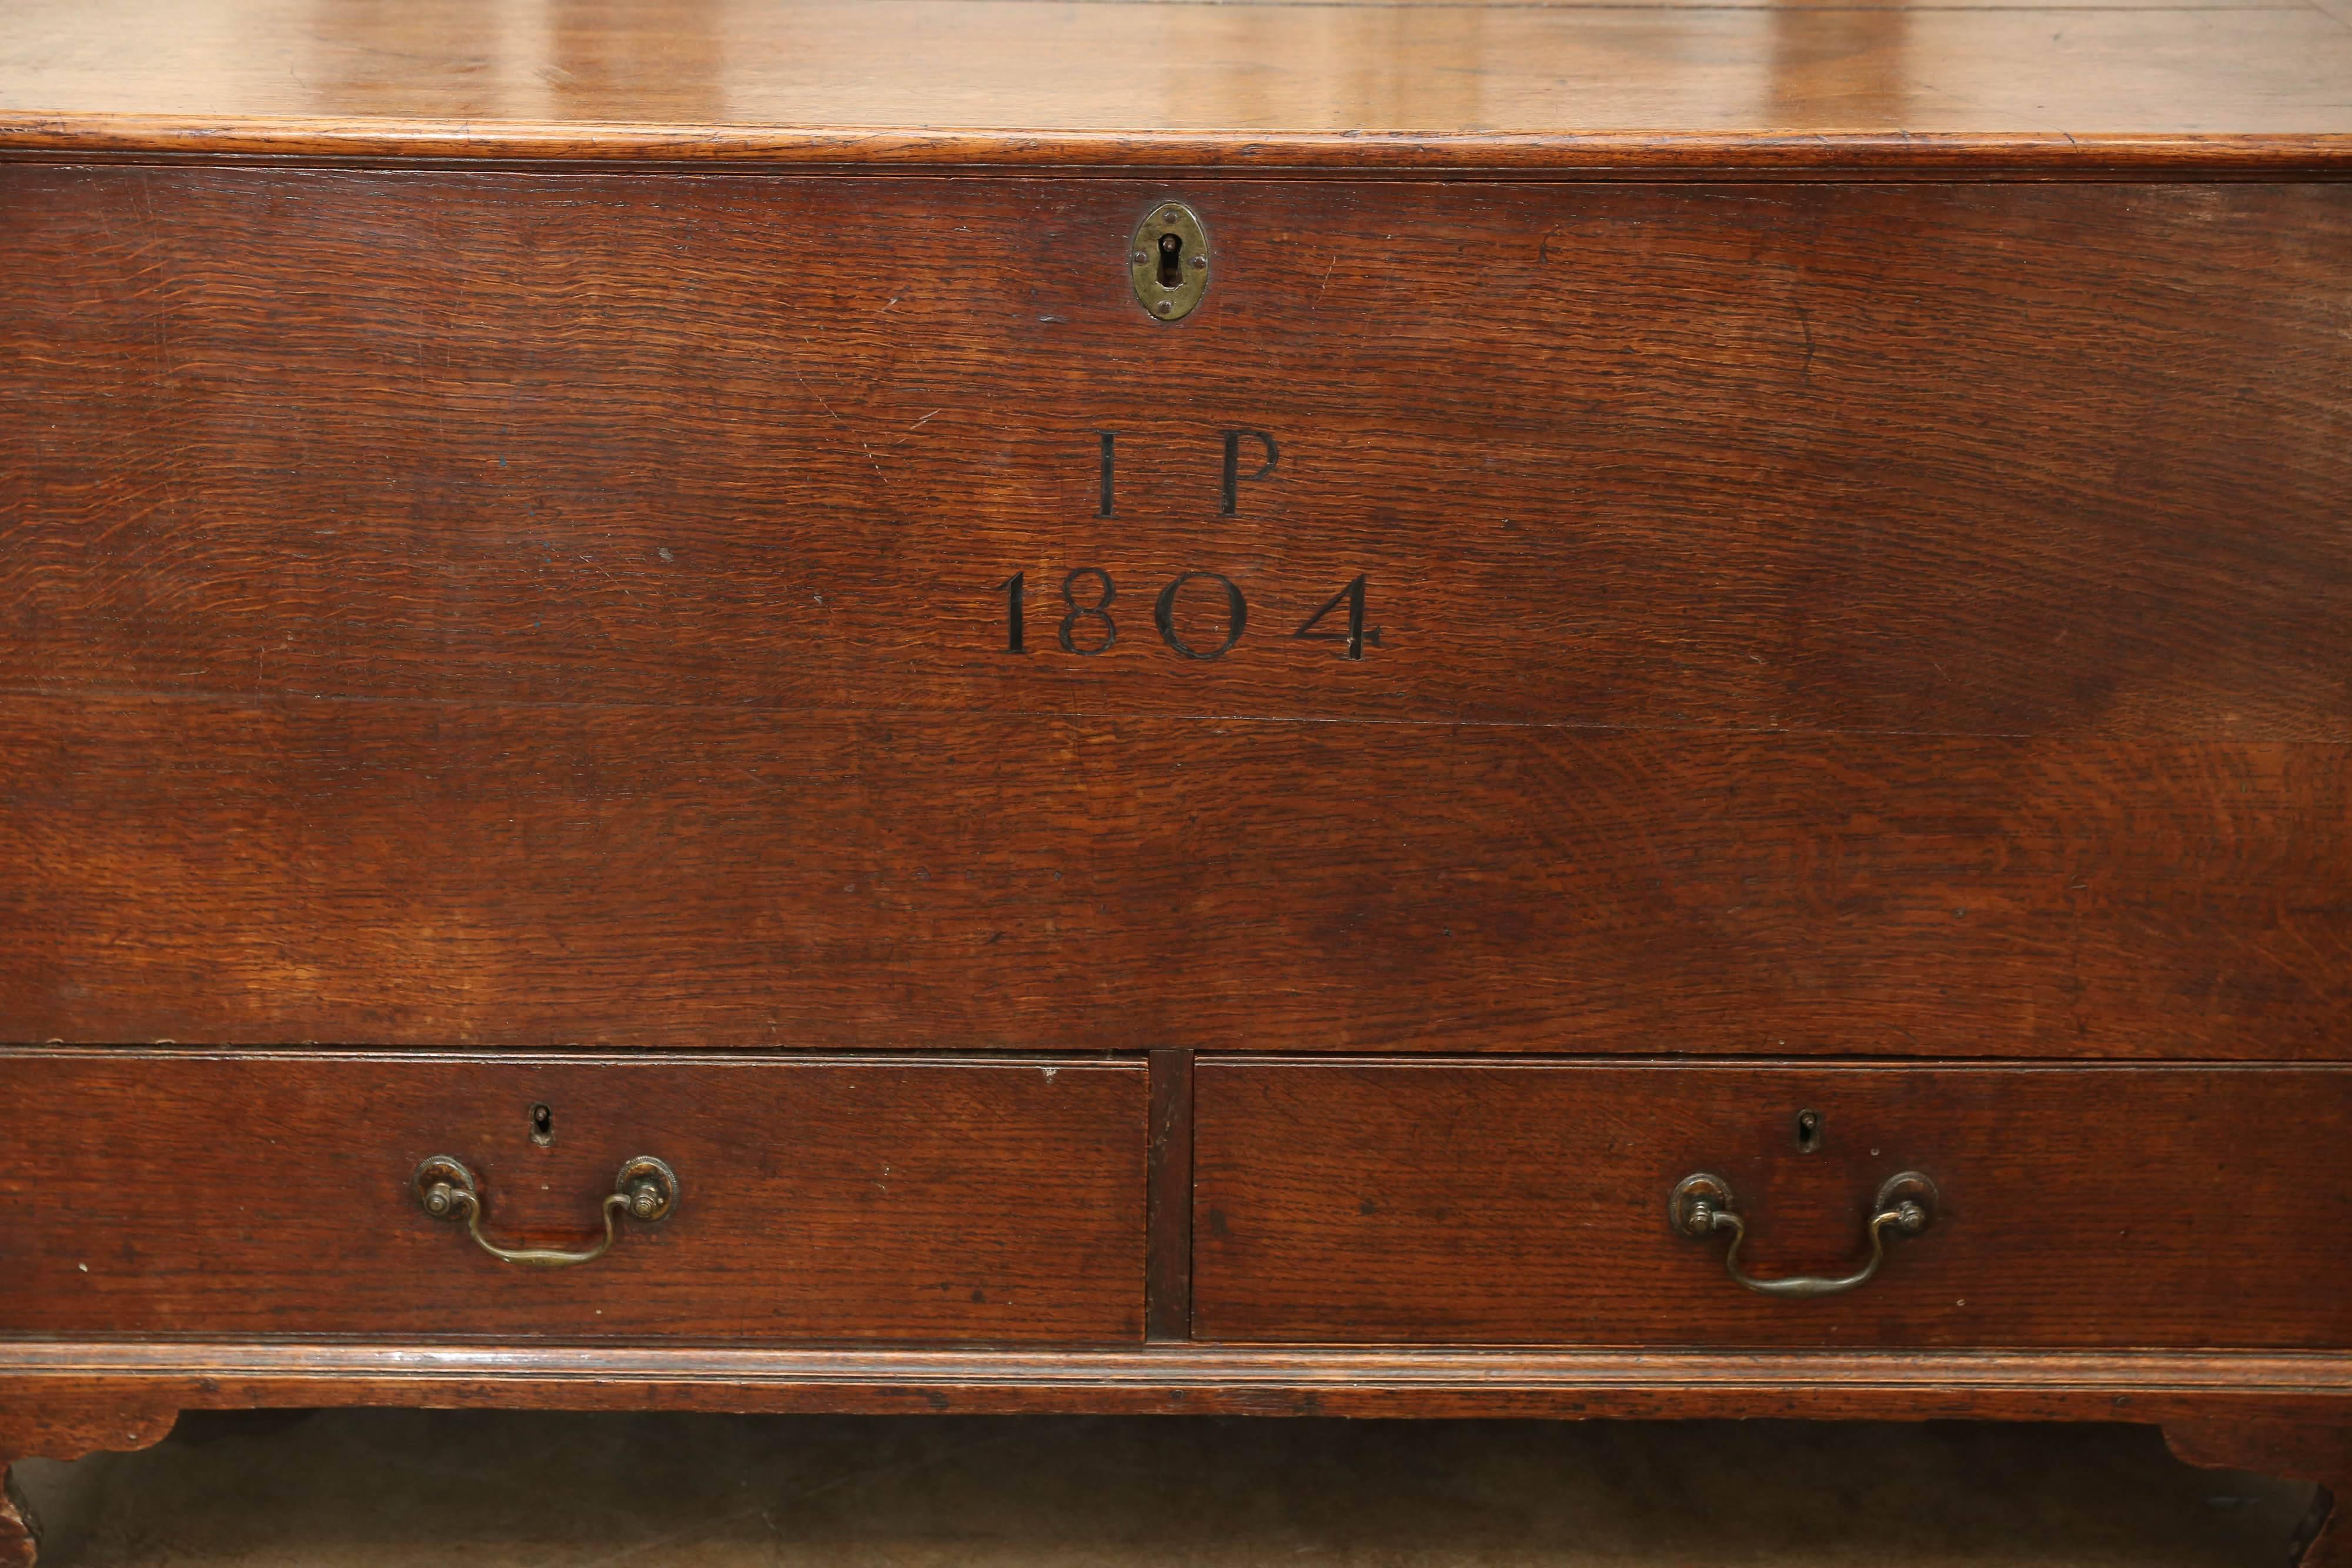 19th century chest on bracket feet with a top that opens to reveal storage and drawers below. Painted are the initials I.P. and the date, 1804. Beautiful patina.